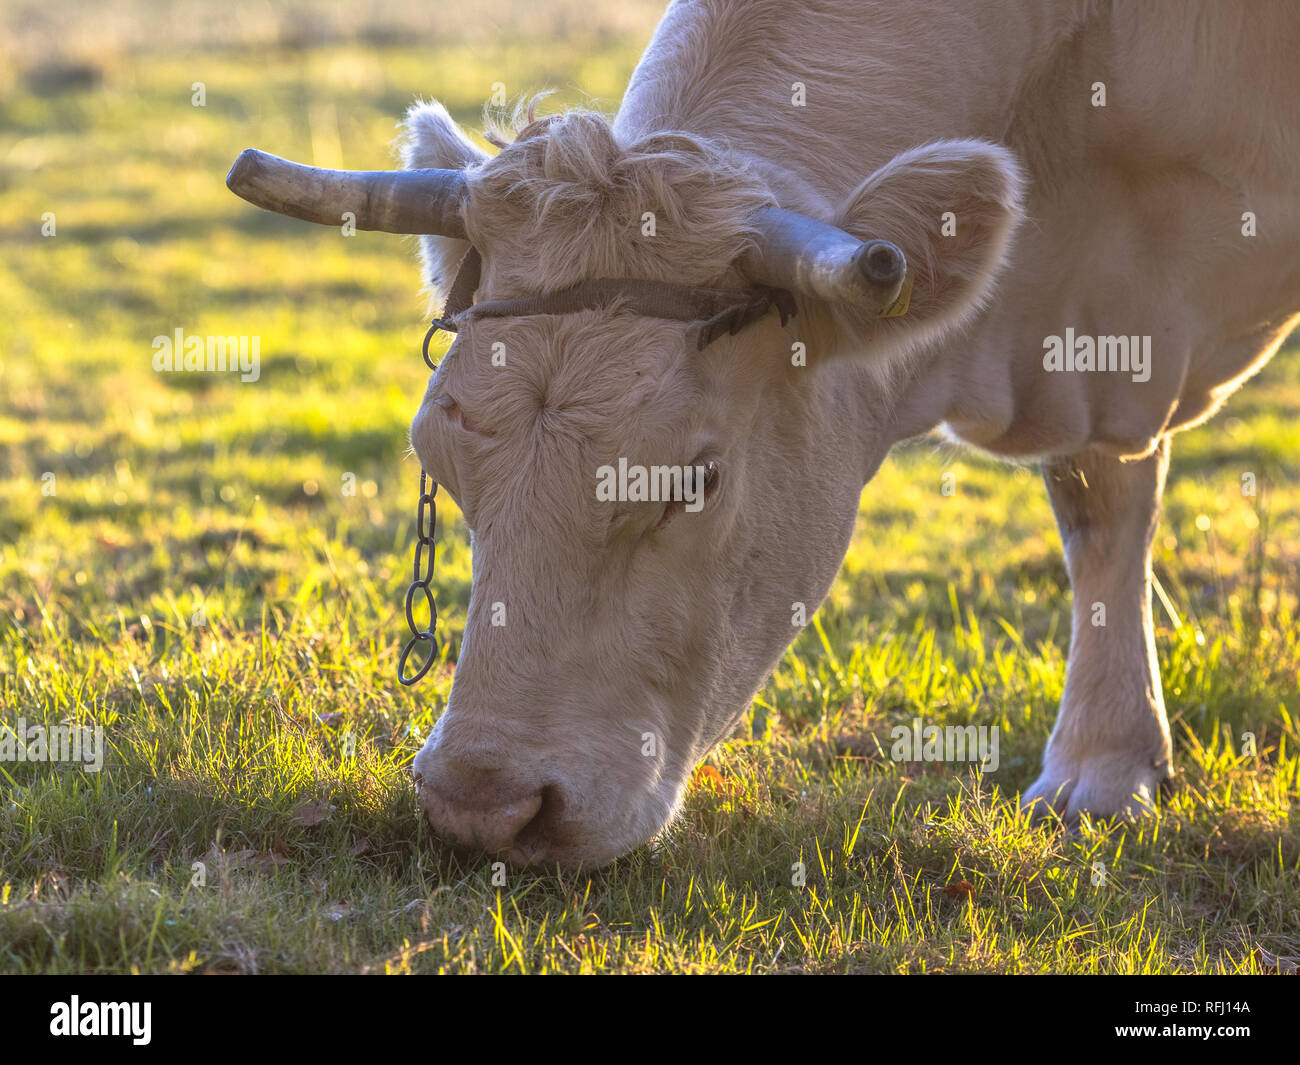 White cow grazing in natural grassland back lit by setting sun. Netherlands Stock Photo